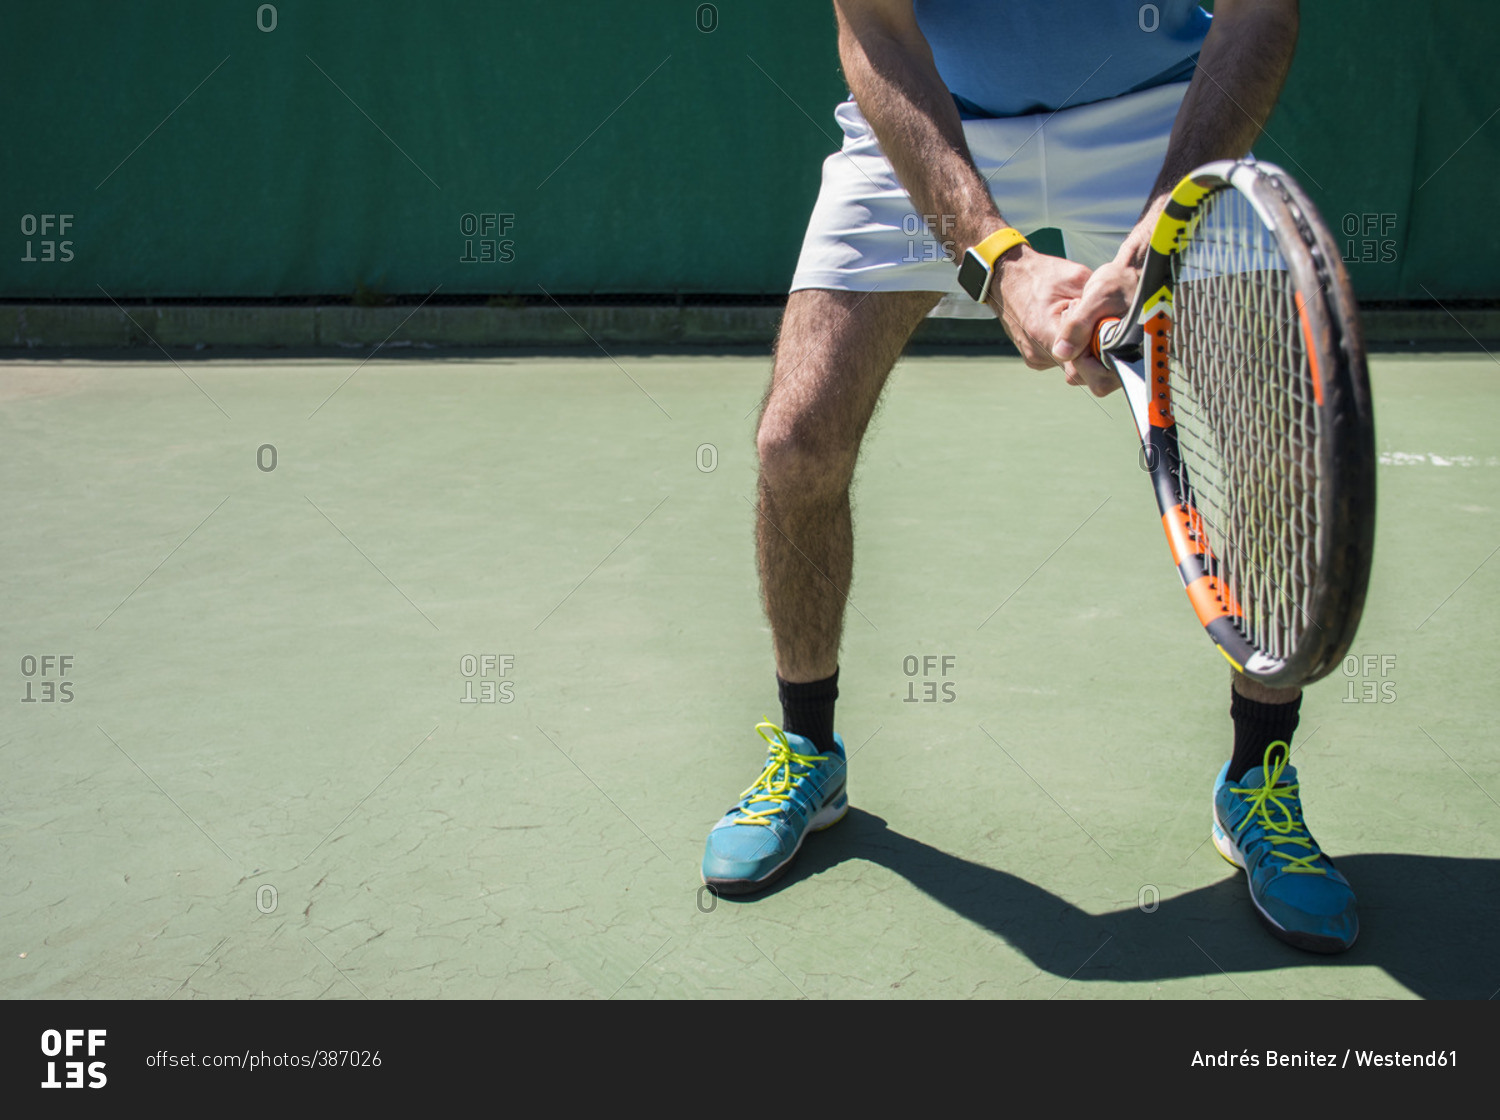 Legs of tennis player with racket